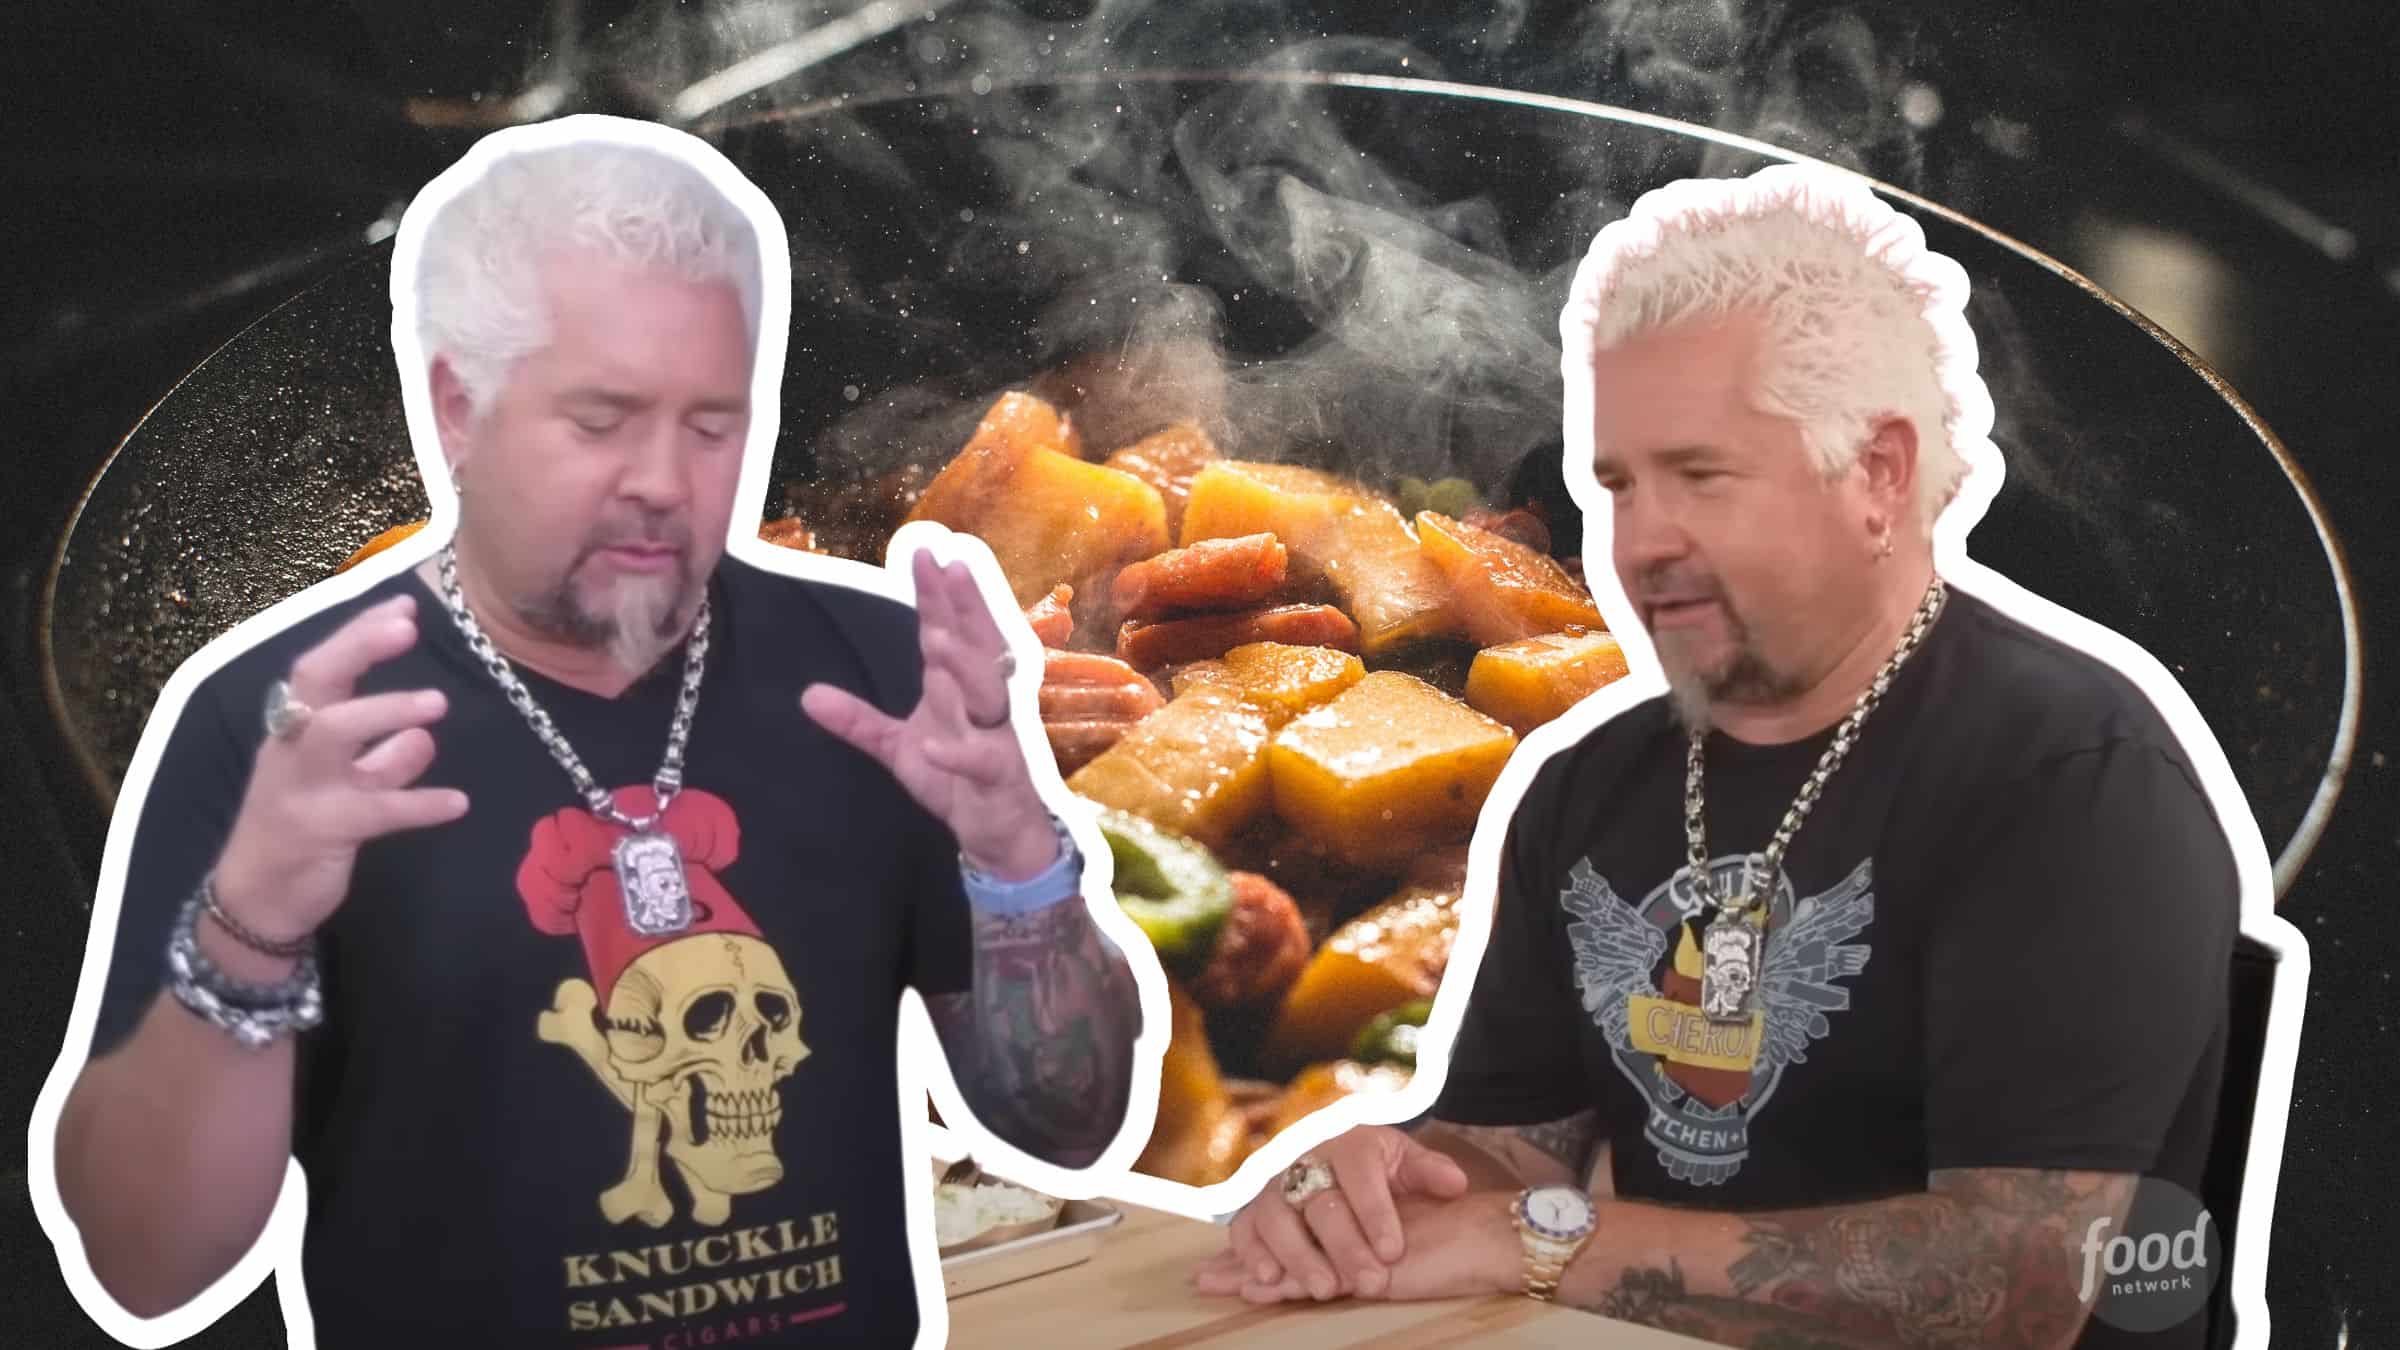 what does dives mean in diners drive-ins and dives?